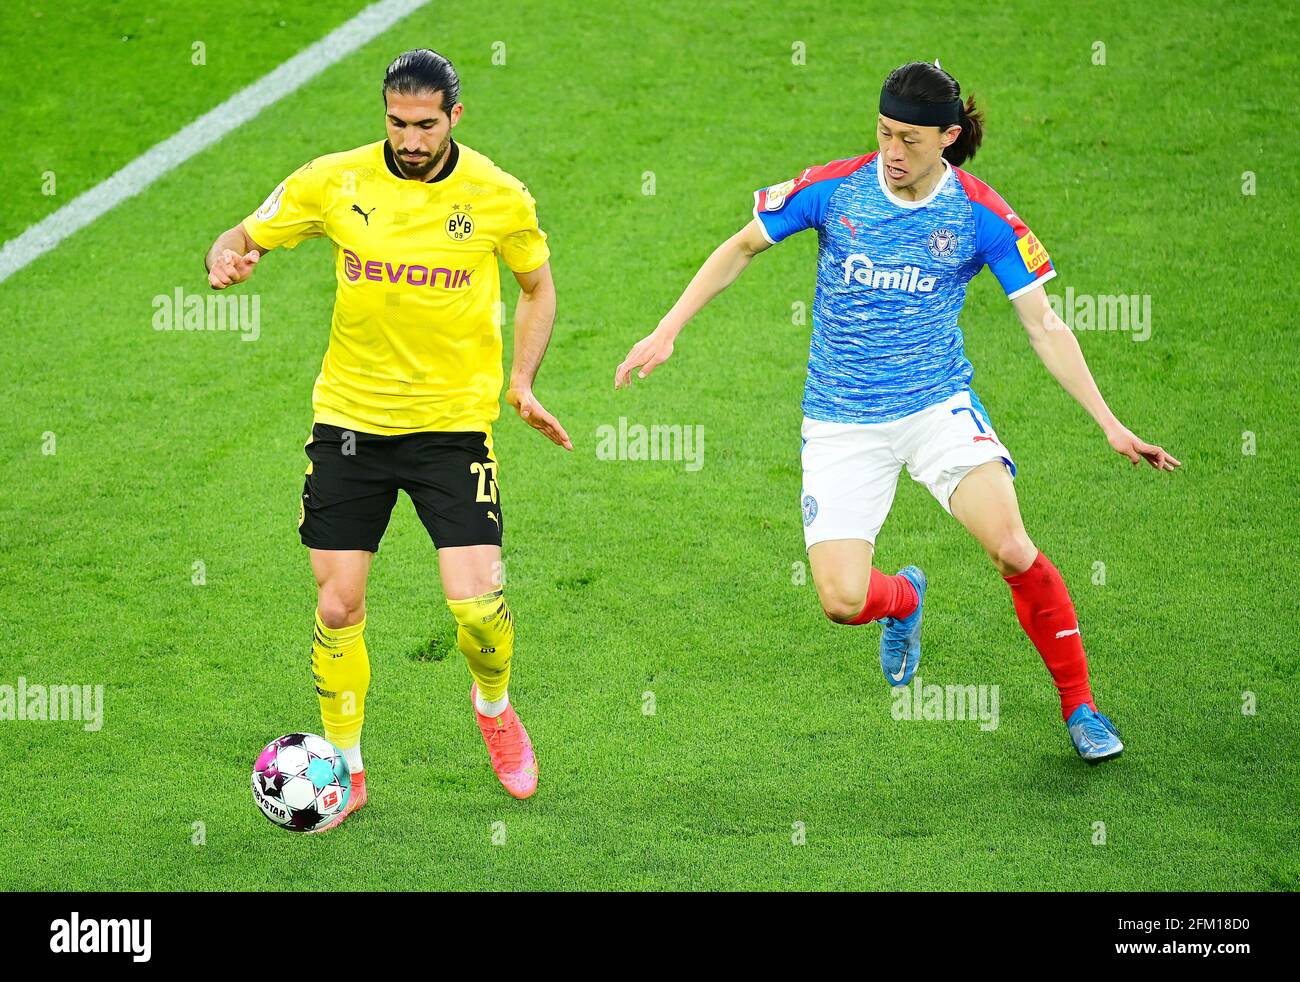 left to right Emre CAN (DO) versus Jae Sung LEE (KI), action, duels, football DFB Pokal, semi-finals, Borussia Dortmund (DO) - Holstein Kiel (KI) 5: 0, on May 1st, 2021 in Dortmund/Germany. Photo: TimGroothuis/Witters/pool via Fotoagentur SVEN SIMON # DFB regulations prohibit any use of photographs as image sequences and/or quasi-video # Editorial Use ONLY # National and International News Agencies OUT | usage worldwide Stock Photo